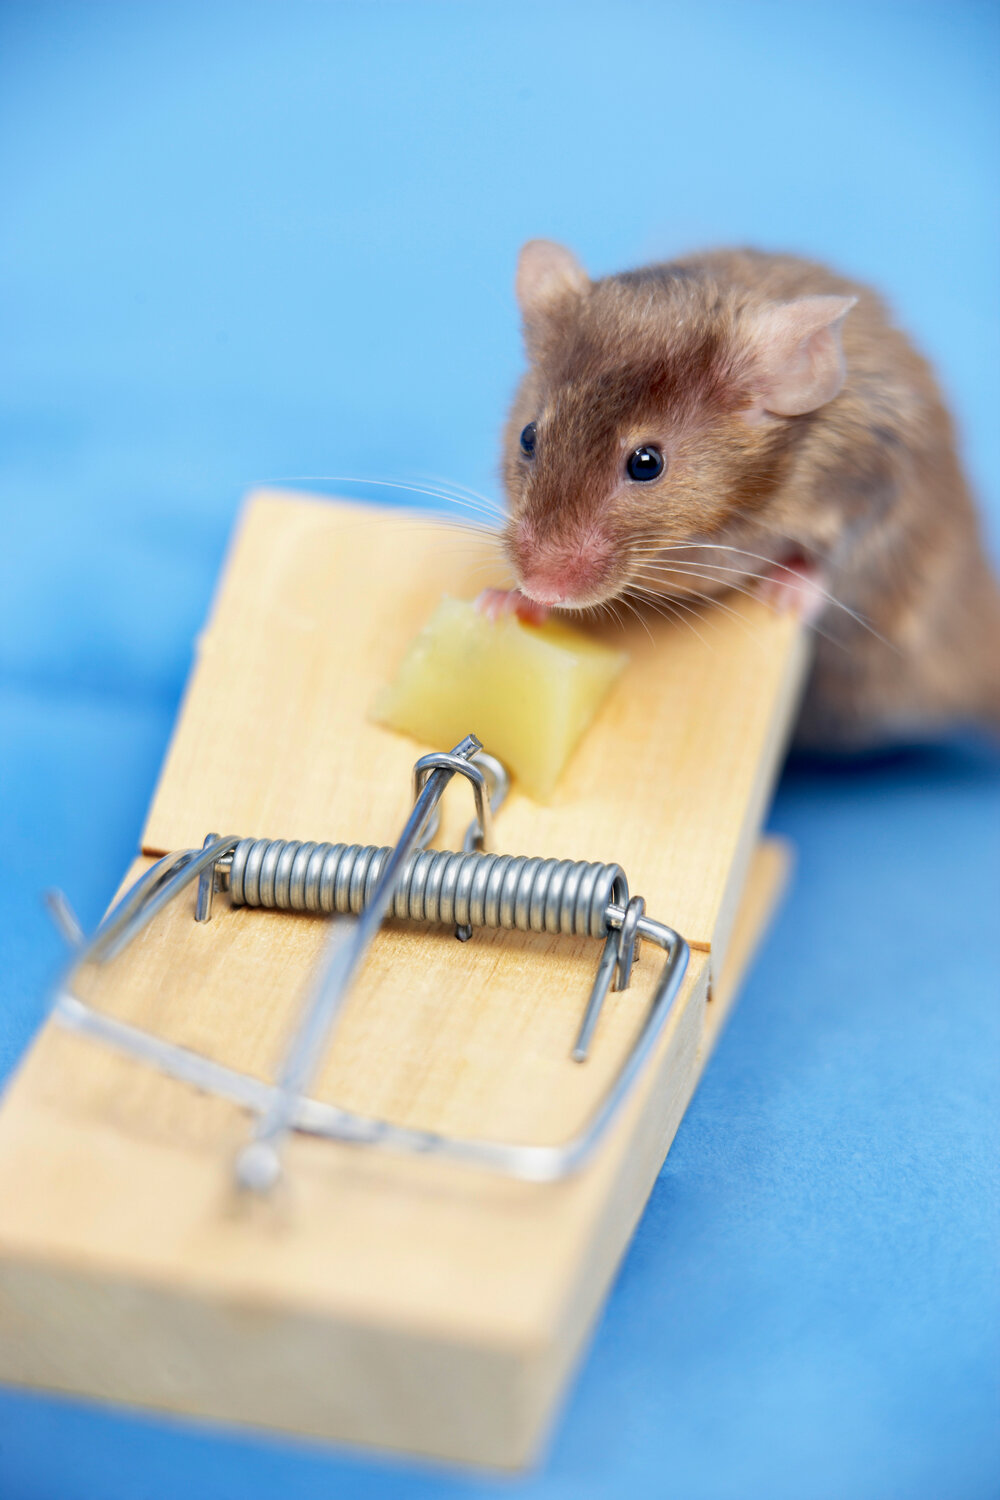 Mouse traps are an effective way to get rid of mice that have taken up residence inside your home.